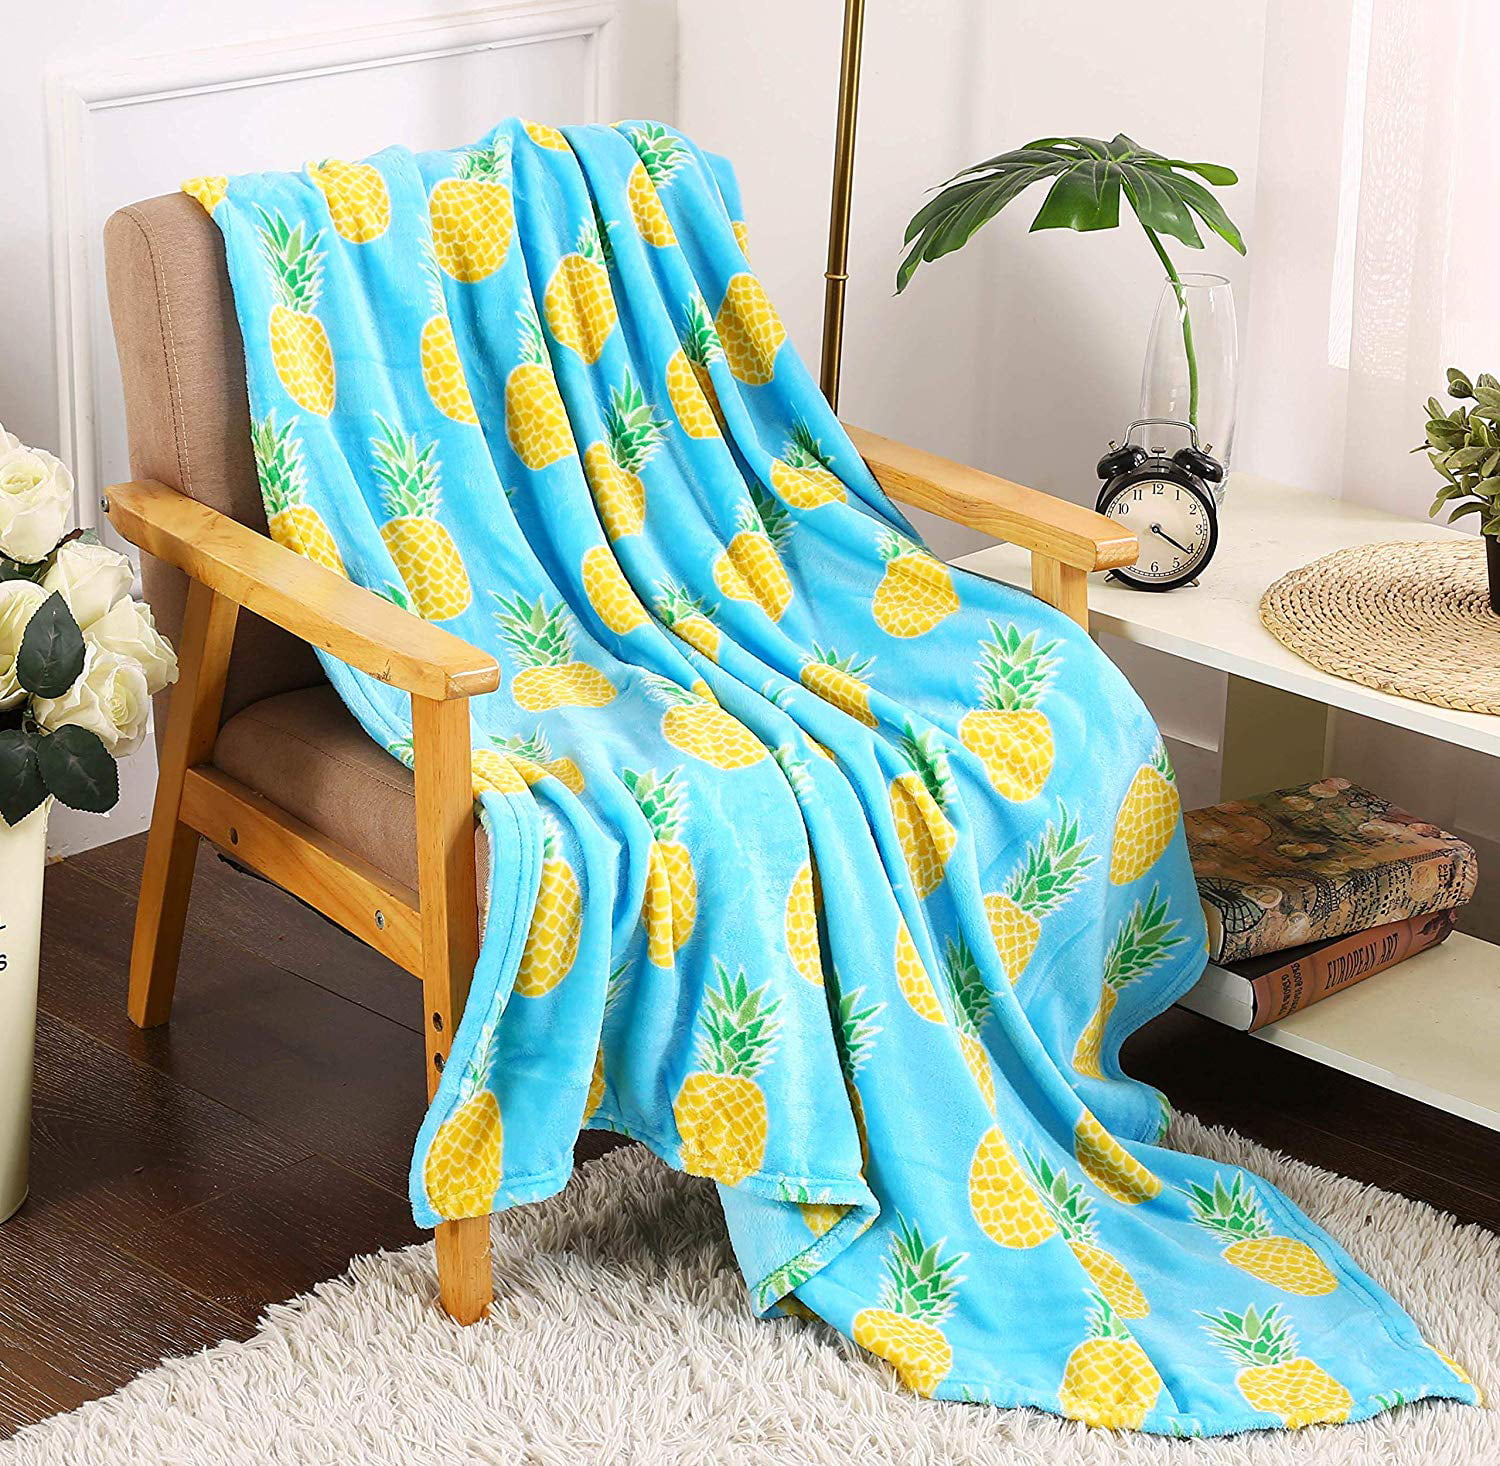 Flannel Fleece Blanket Full Size Pineapple Coconut Palm Leaves Blanket,All-Season Plush Blanket for Couch Bed Travelling Camping Or Kids Adults 60X50 